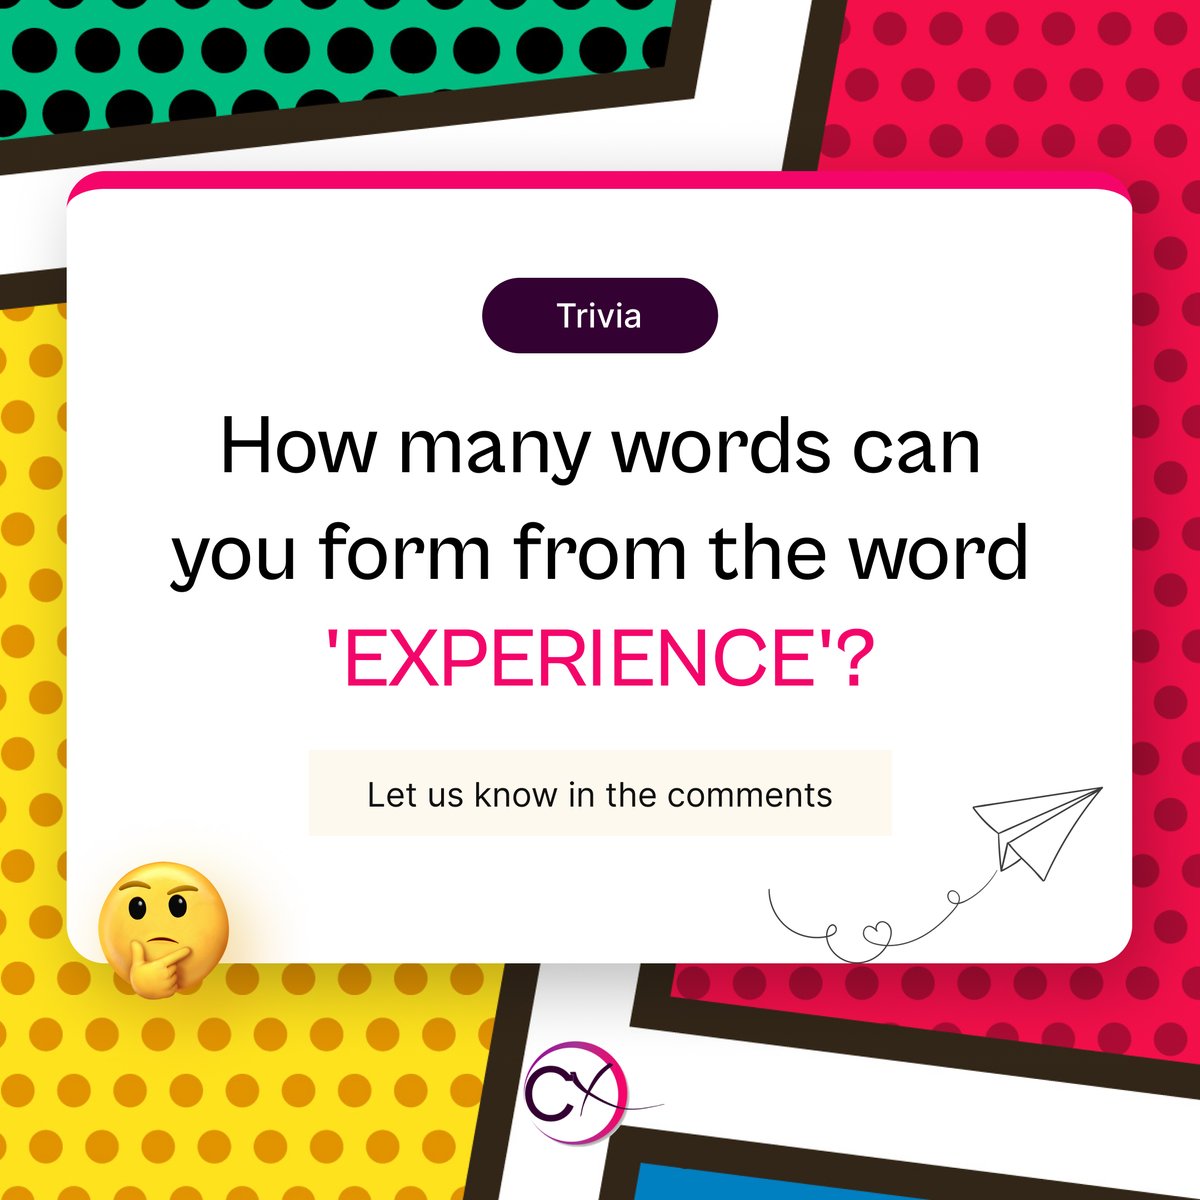 🔠 Wordsmiths assemble! 

How many words can you form from the word 
'EXPERIENCE'? 🤔

Let's turn letters into laughter!

Comment with your word creations and let’s make this a wordplay party! 🎈🧠 #TGIF

#CXCoeur #CX #COEUR #Experience #xperience #WordplayChallenge #BrainTeaser